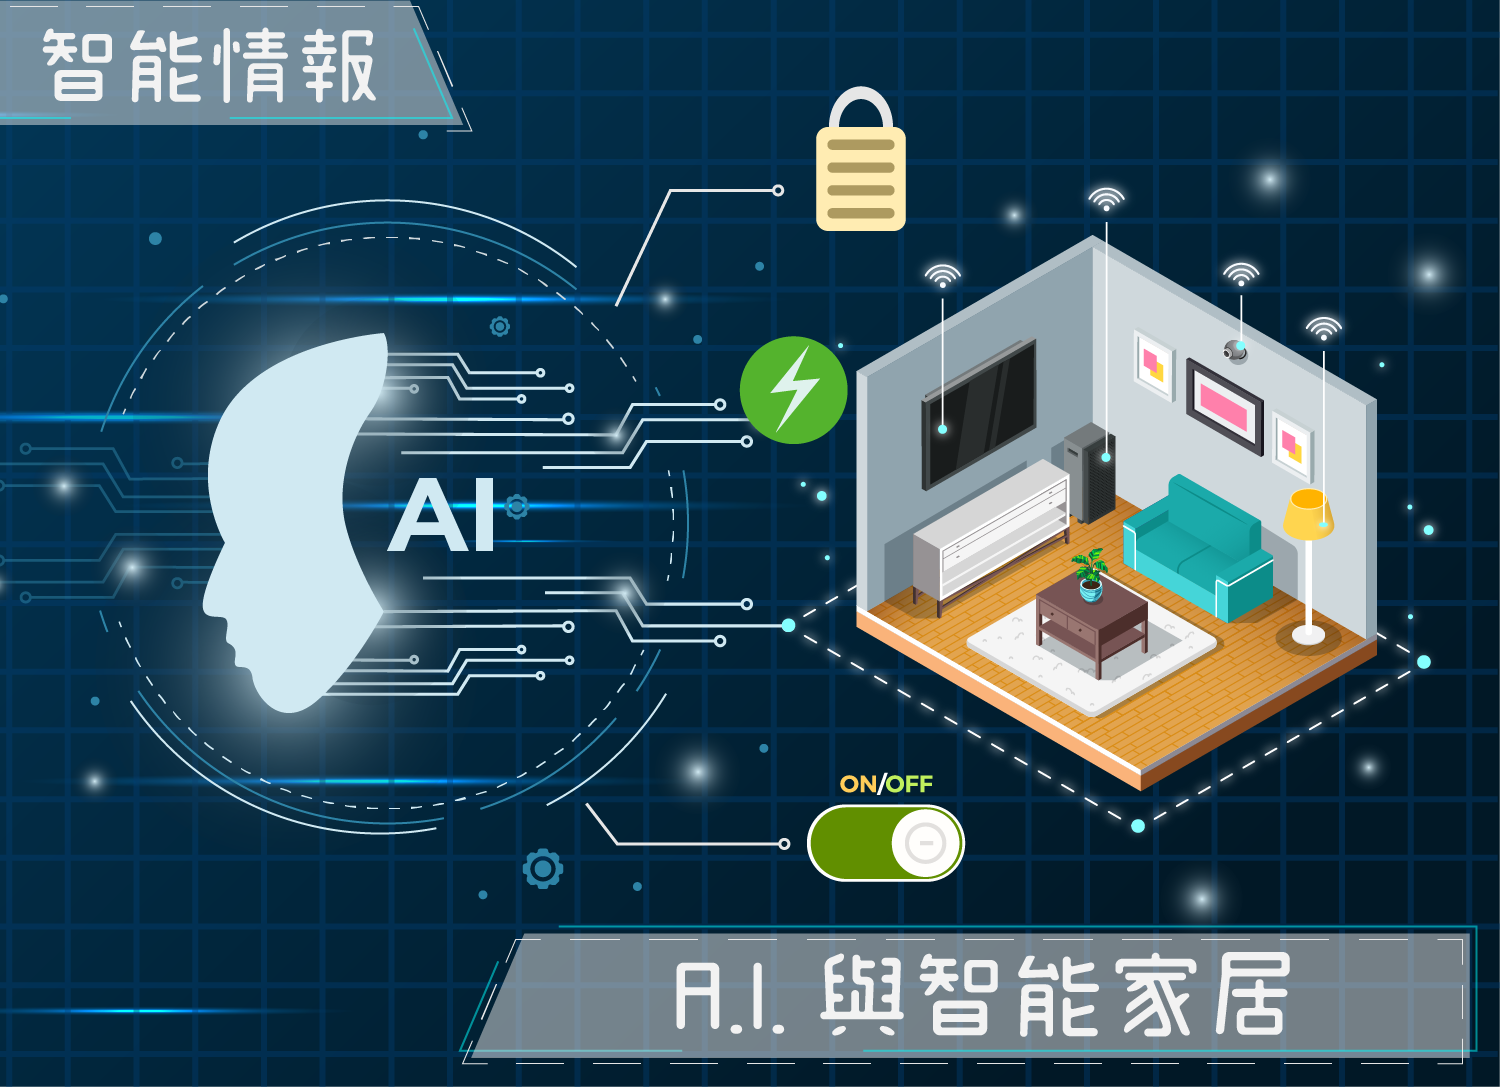 Smart Home with A.I.: Predictions for the Future and Application Examples